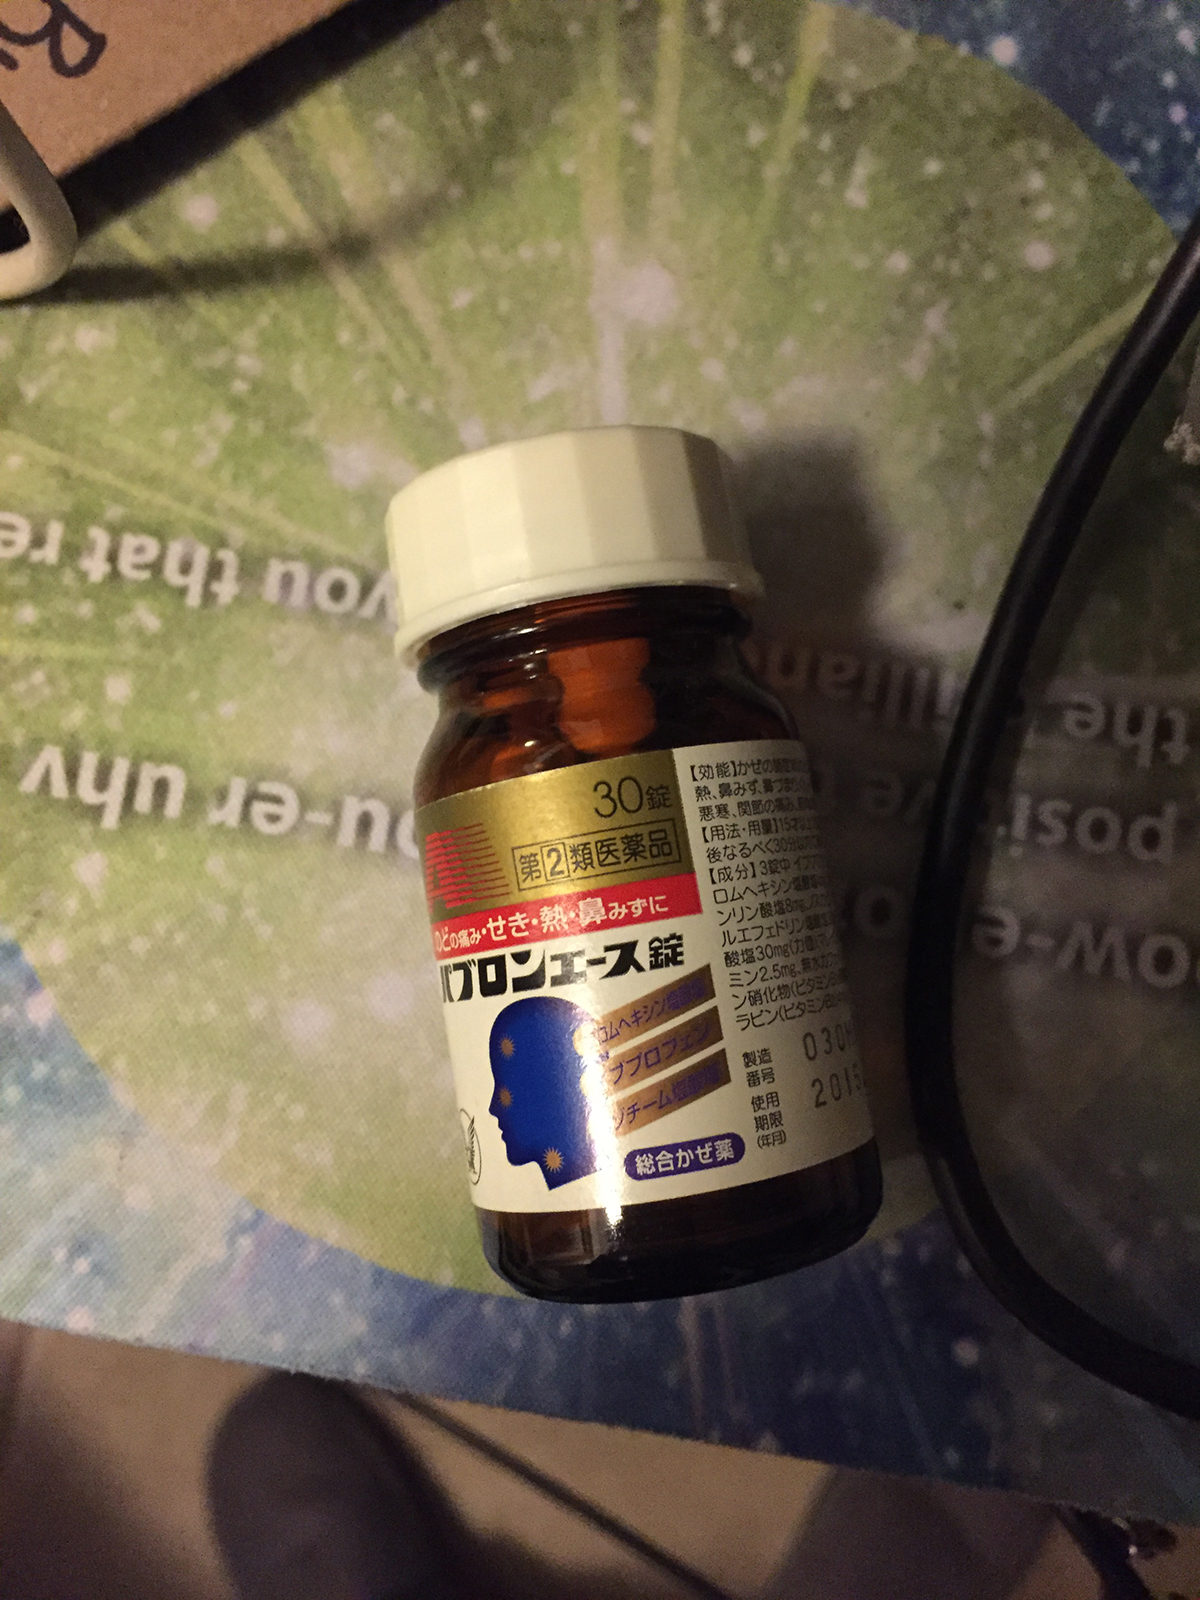 In which there is Japanese medication